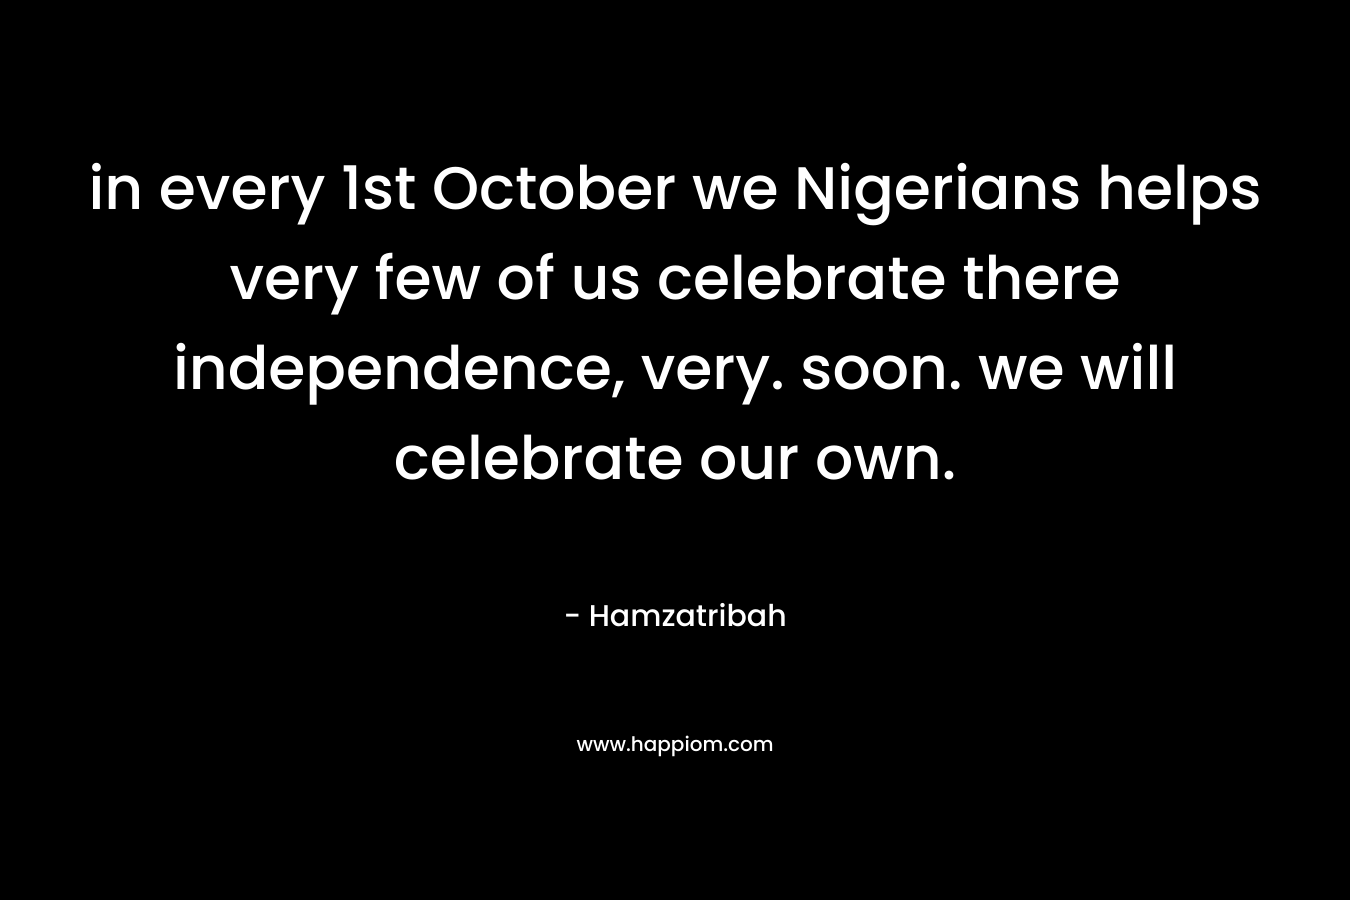 in every 1st October we Nigerians helps very few of us celebrate there independence, very. soon. we will celebrate our own. – Hamzatribah